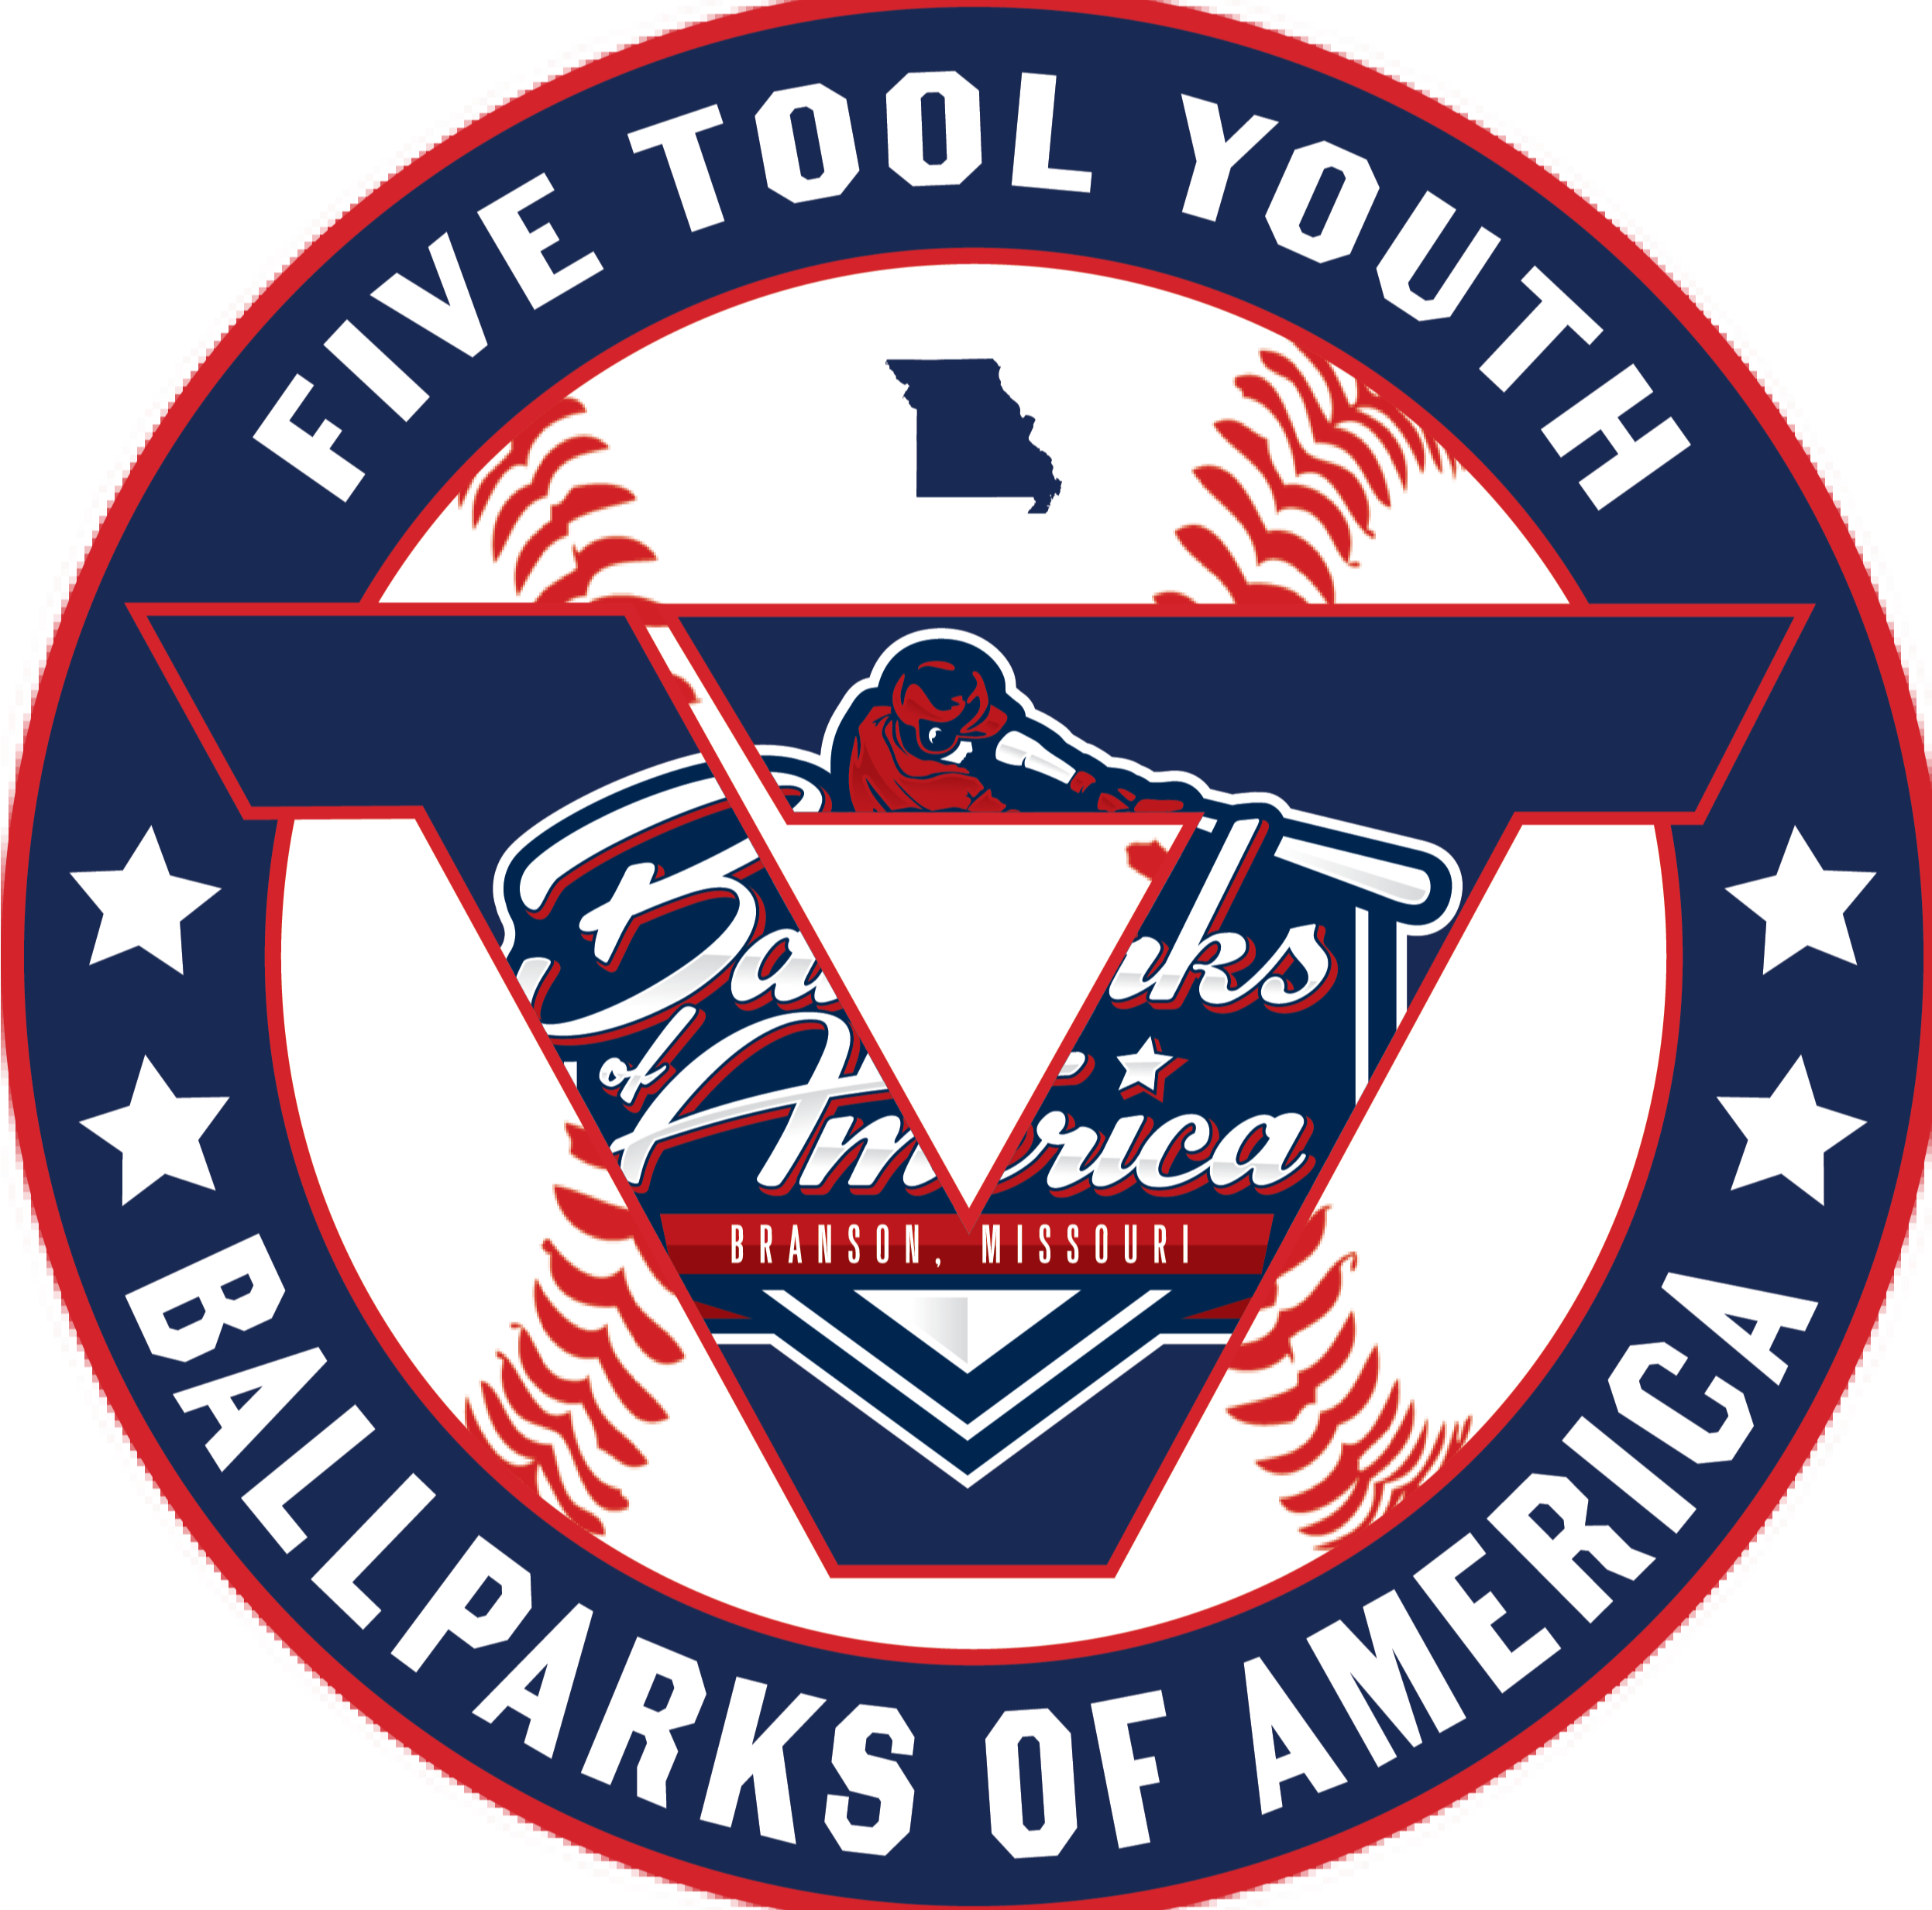 Tournaments Youth Sports Five Tool